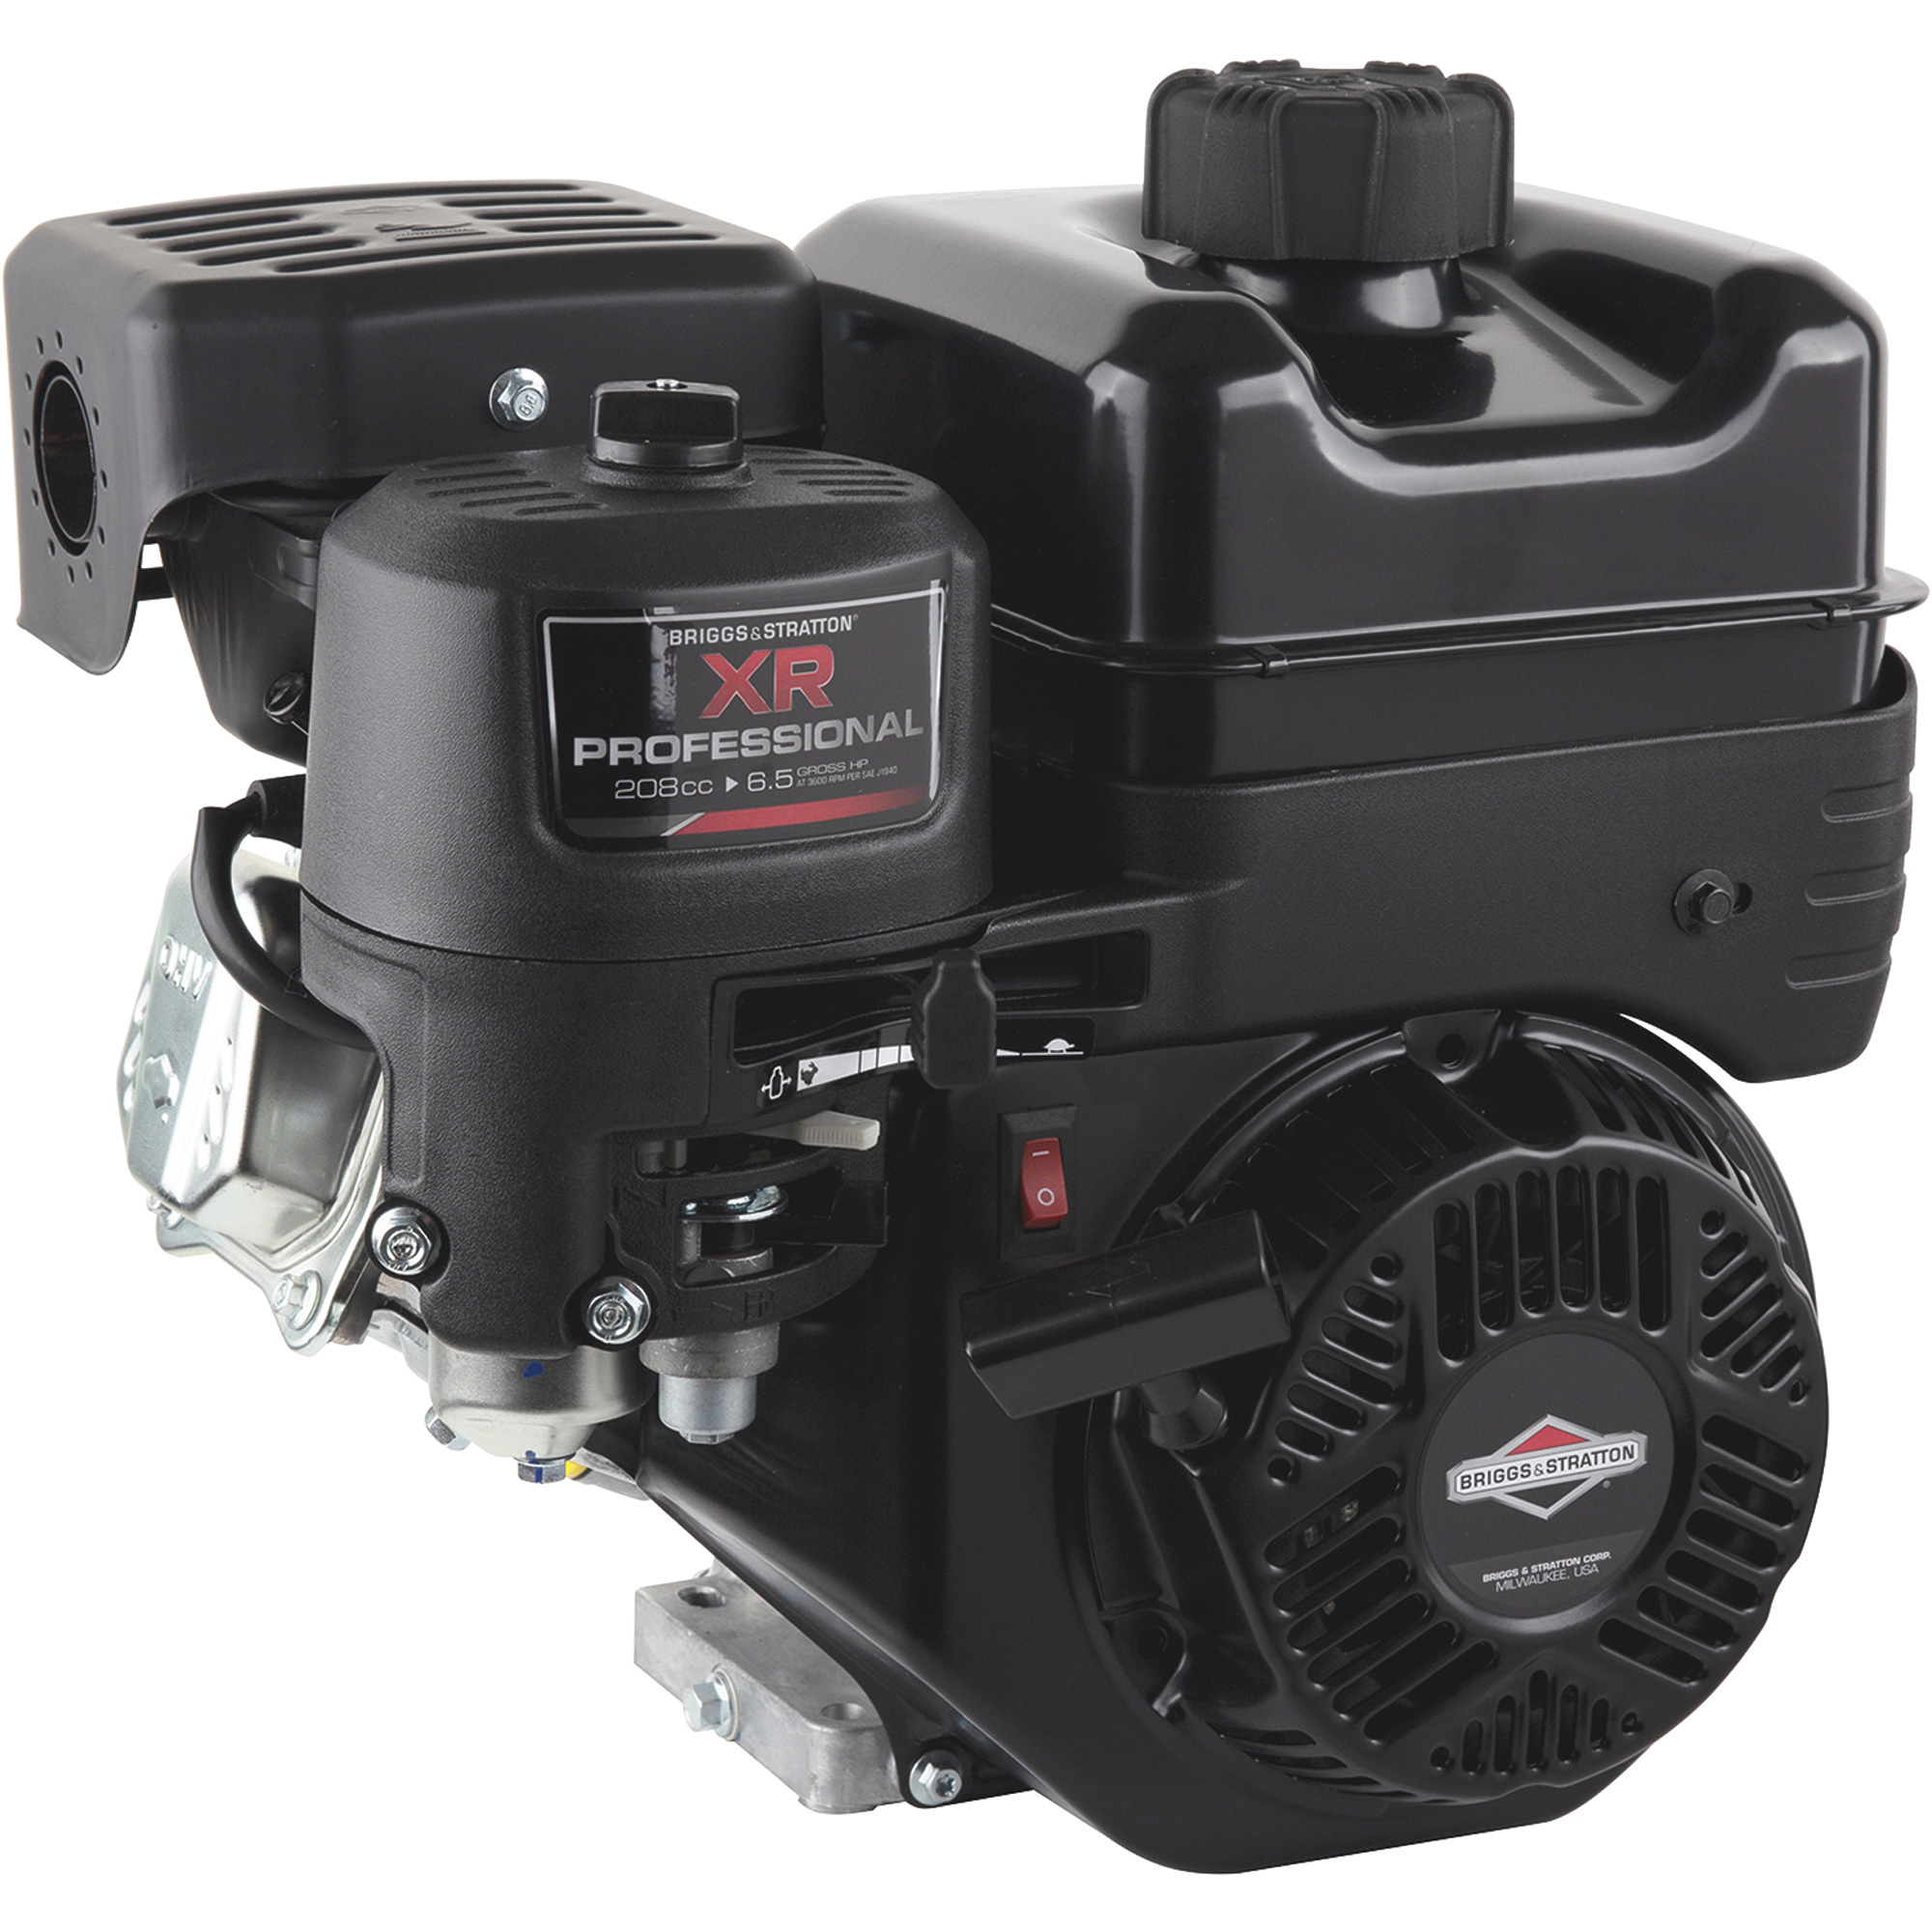  & Stratton 950 Series Horizontal OHV Engine 208cc 3/4in x 2 27 .